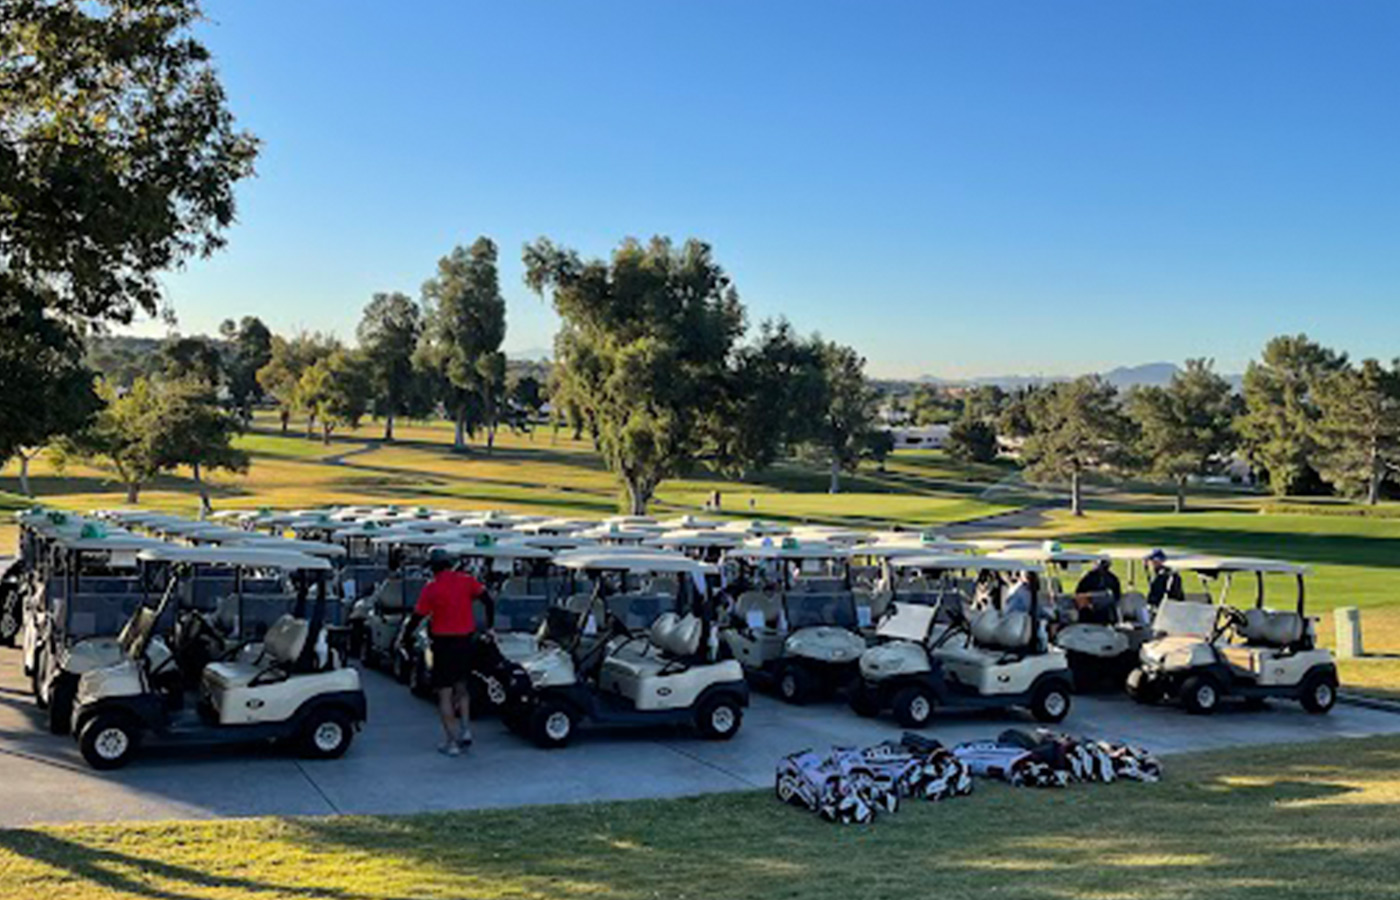 Golf carts all lined up.